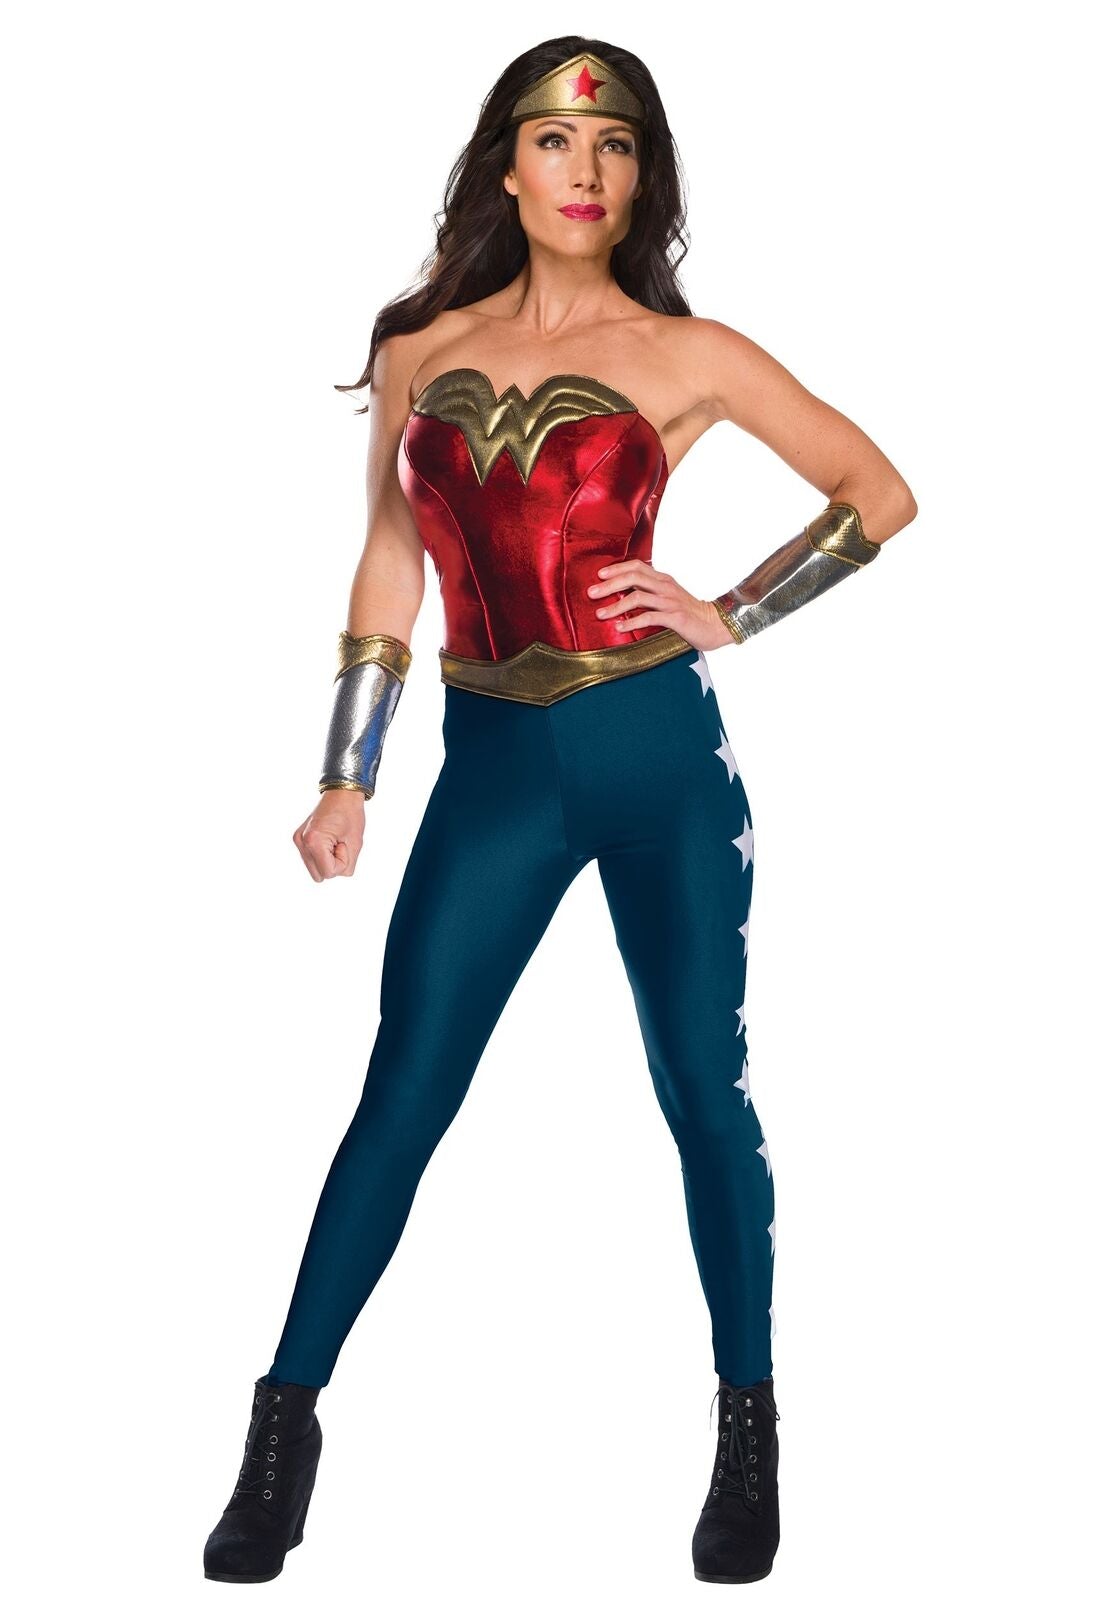 Adult DC Wonder Woman Costume | Decor Gifts and More